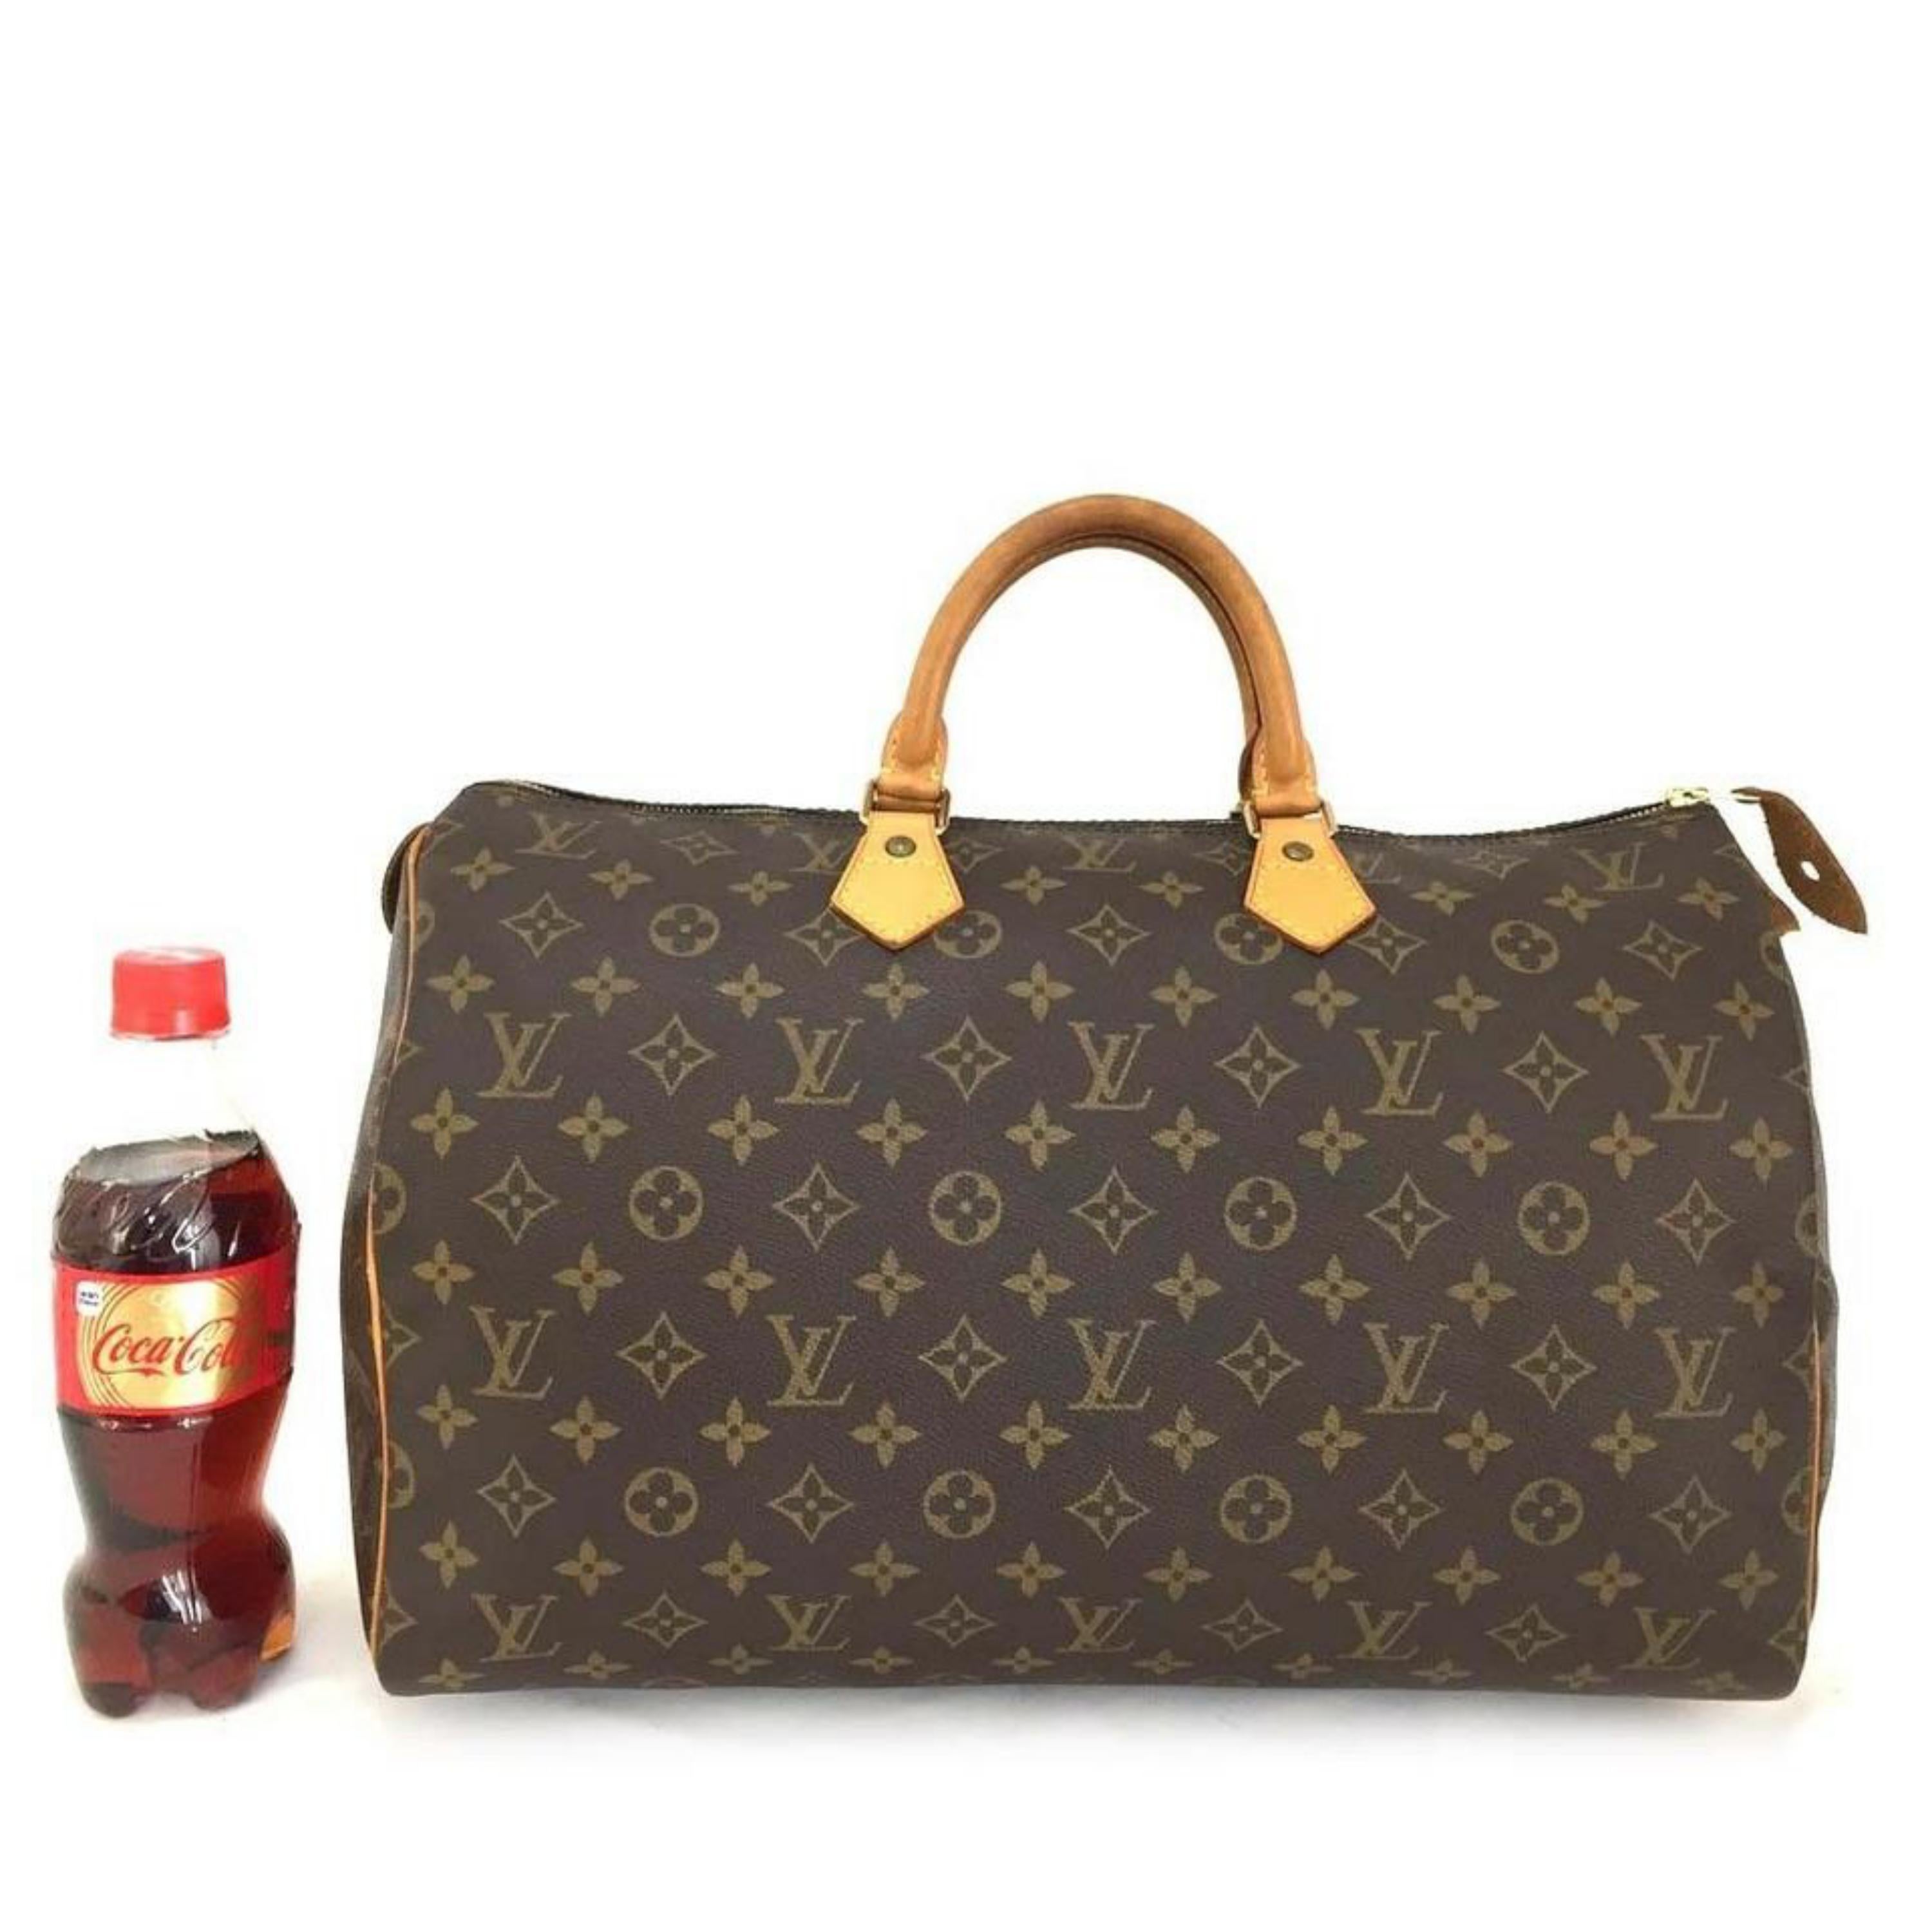 Louis Vuitton Speedy 40 Boston Gm 870010 Brown Coated Canvas Weekend/Travel Bag For Sale 7